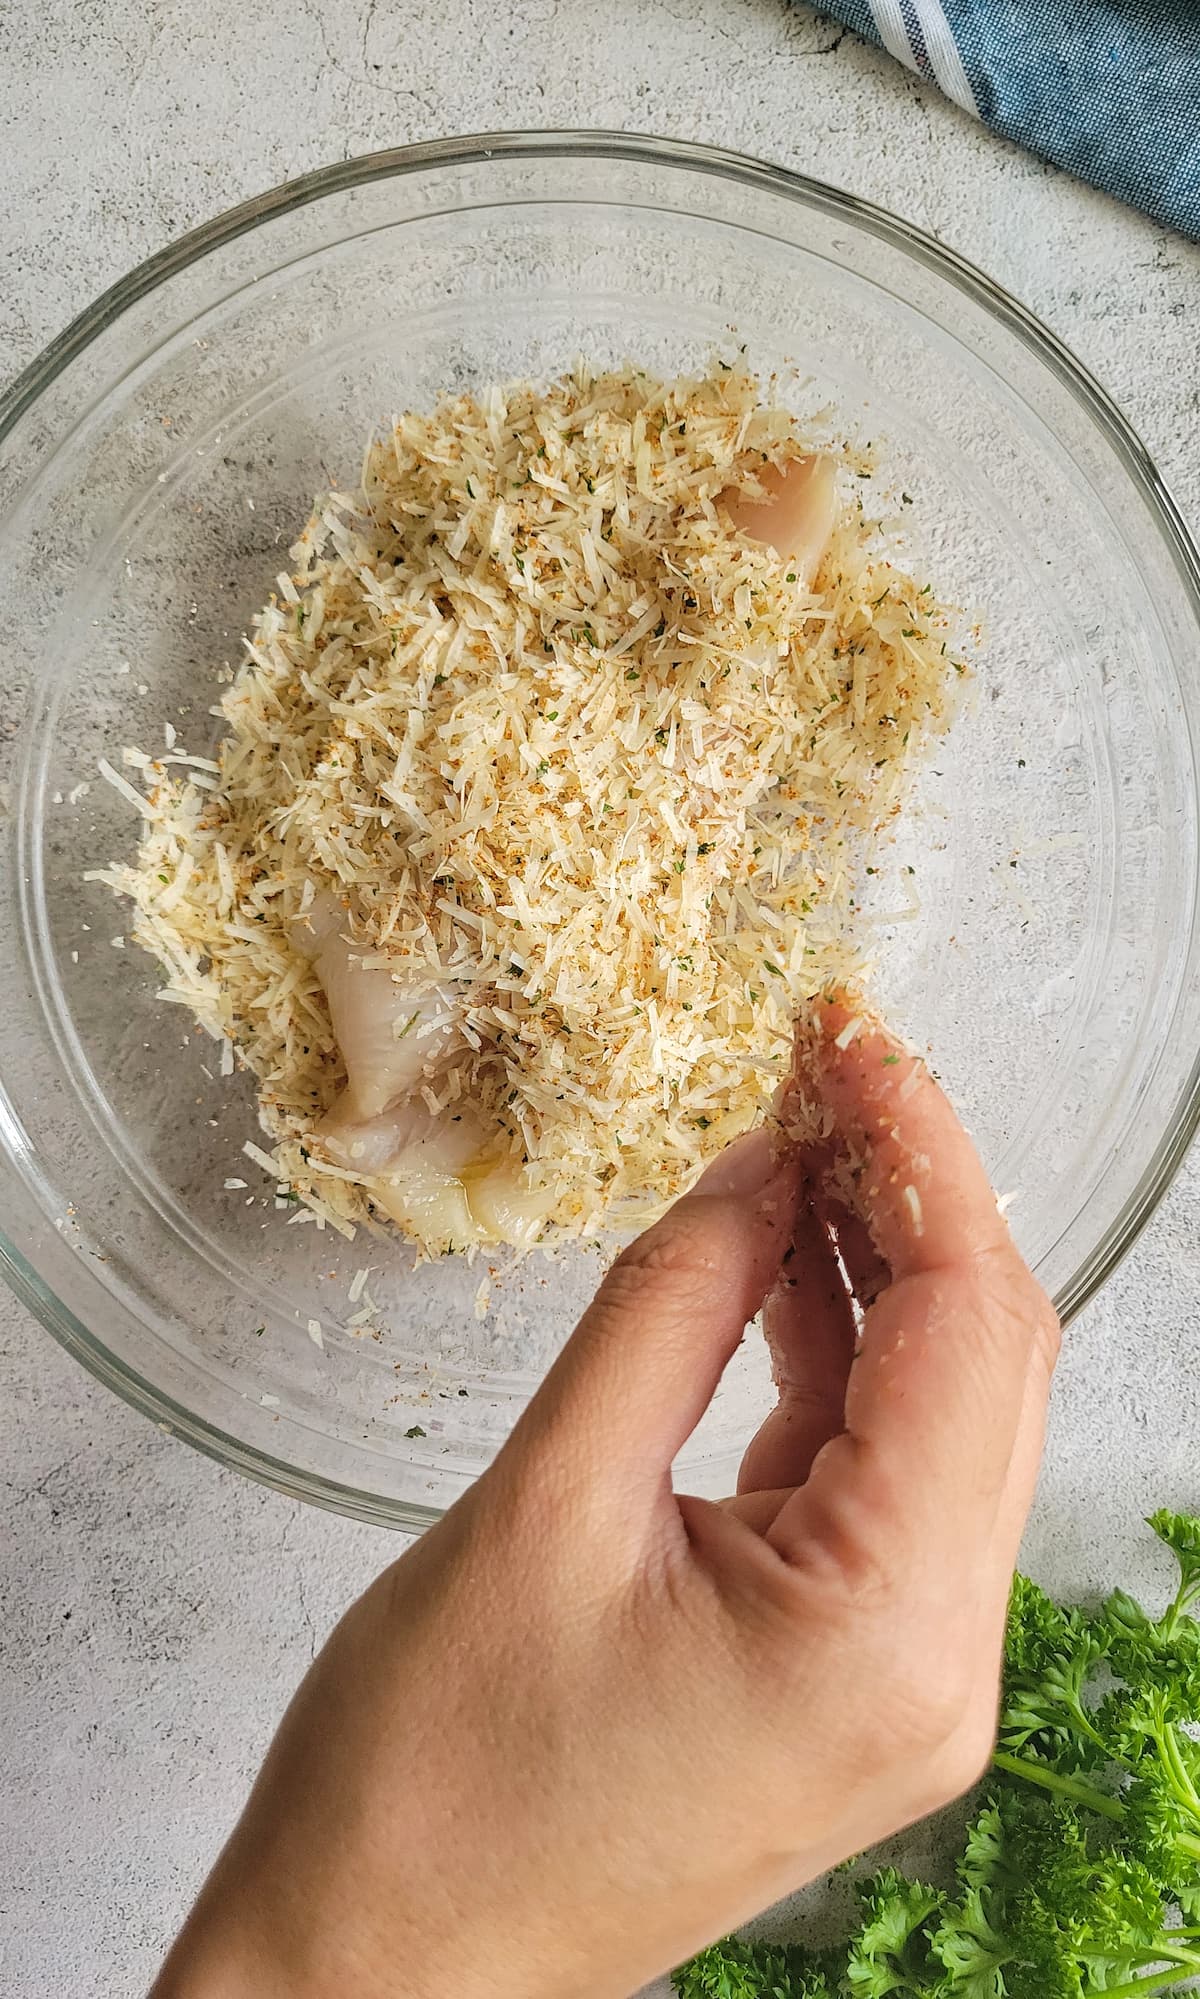 hand coating a fish fillet in a bowl of parmesan cheese and spices